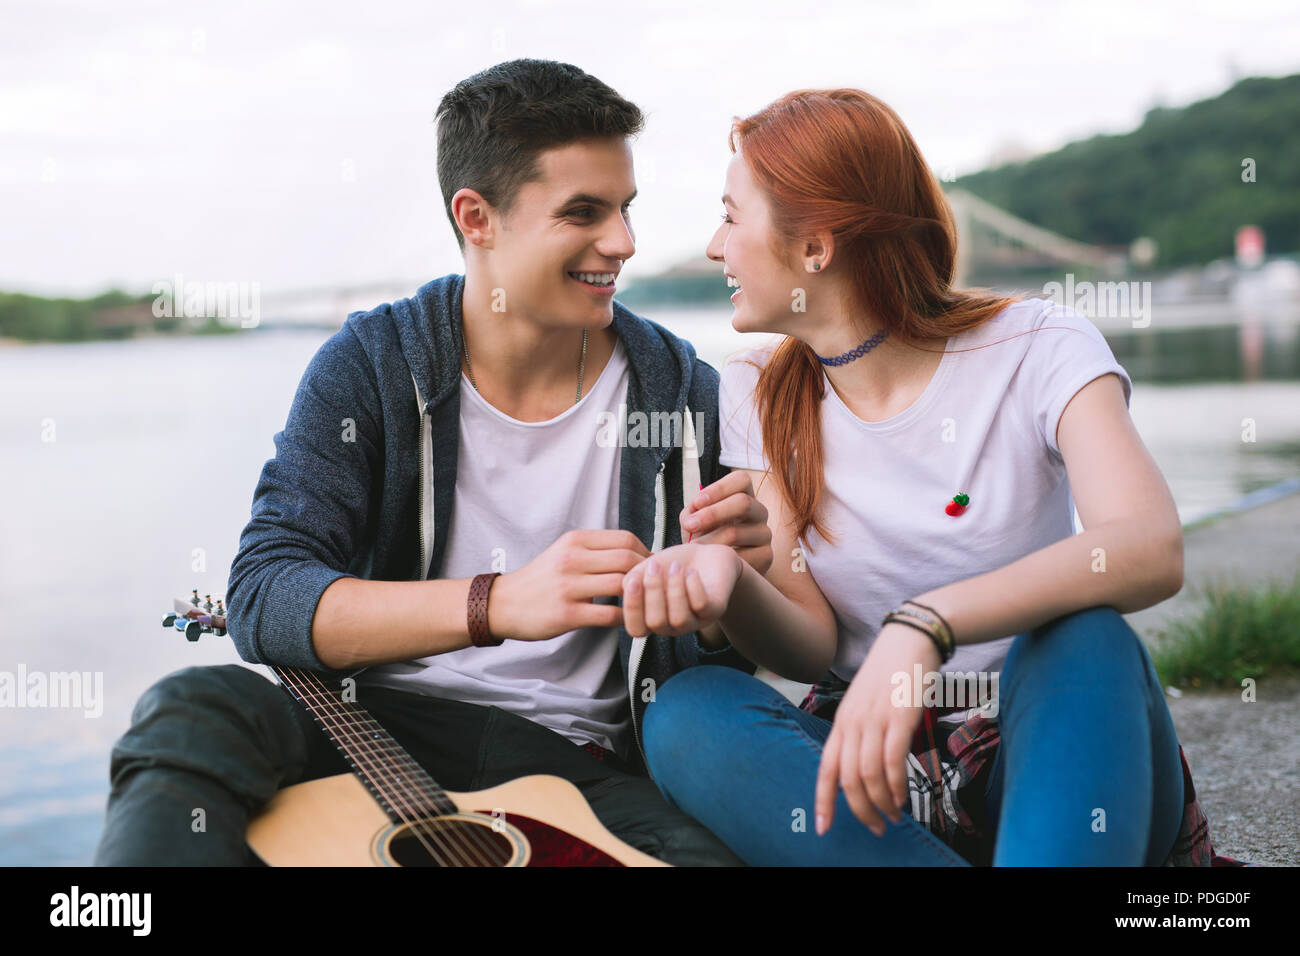 Pleasant cheerful people looking at each other Stock Photo